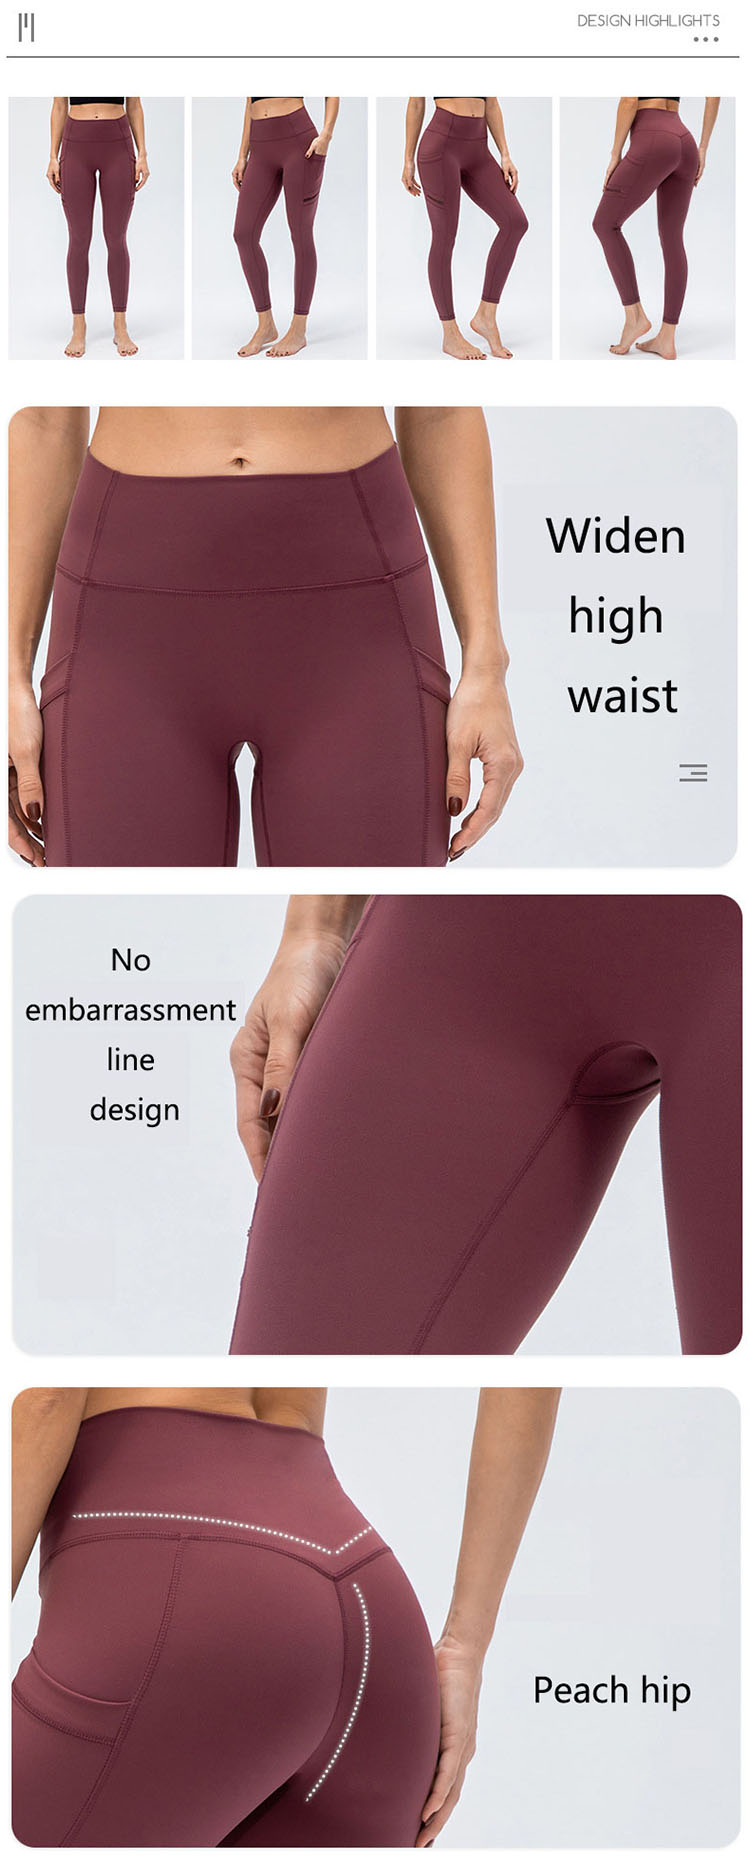 https://www.sportswearmfg.com/wp-content/uploads/2021/11/The-betabrand-dress-pant-yoga-pants-design-is-an-important-process-design-for-the-trousers.jpg